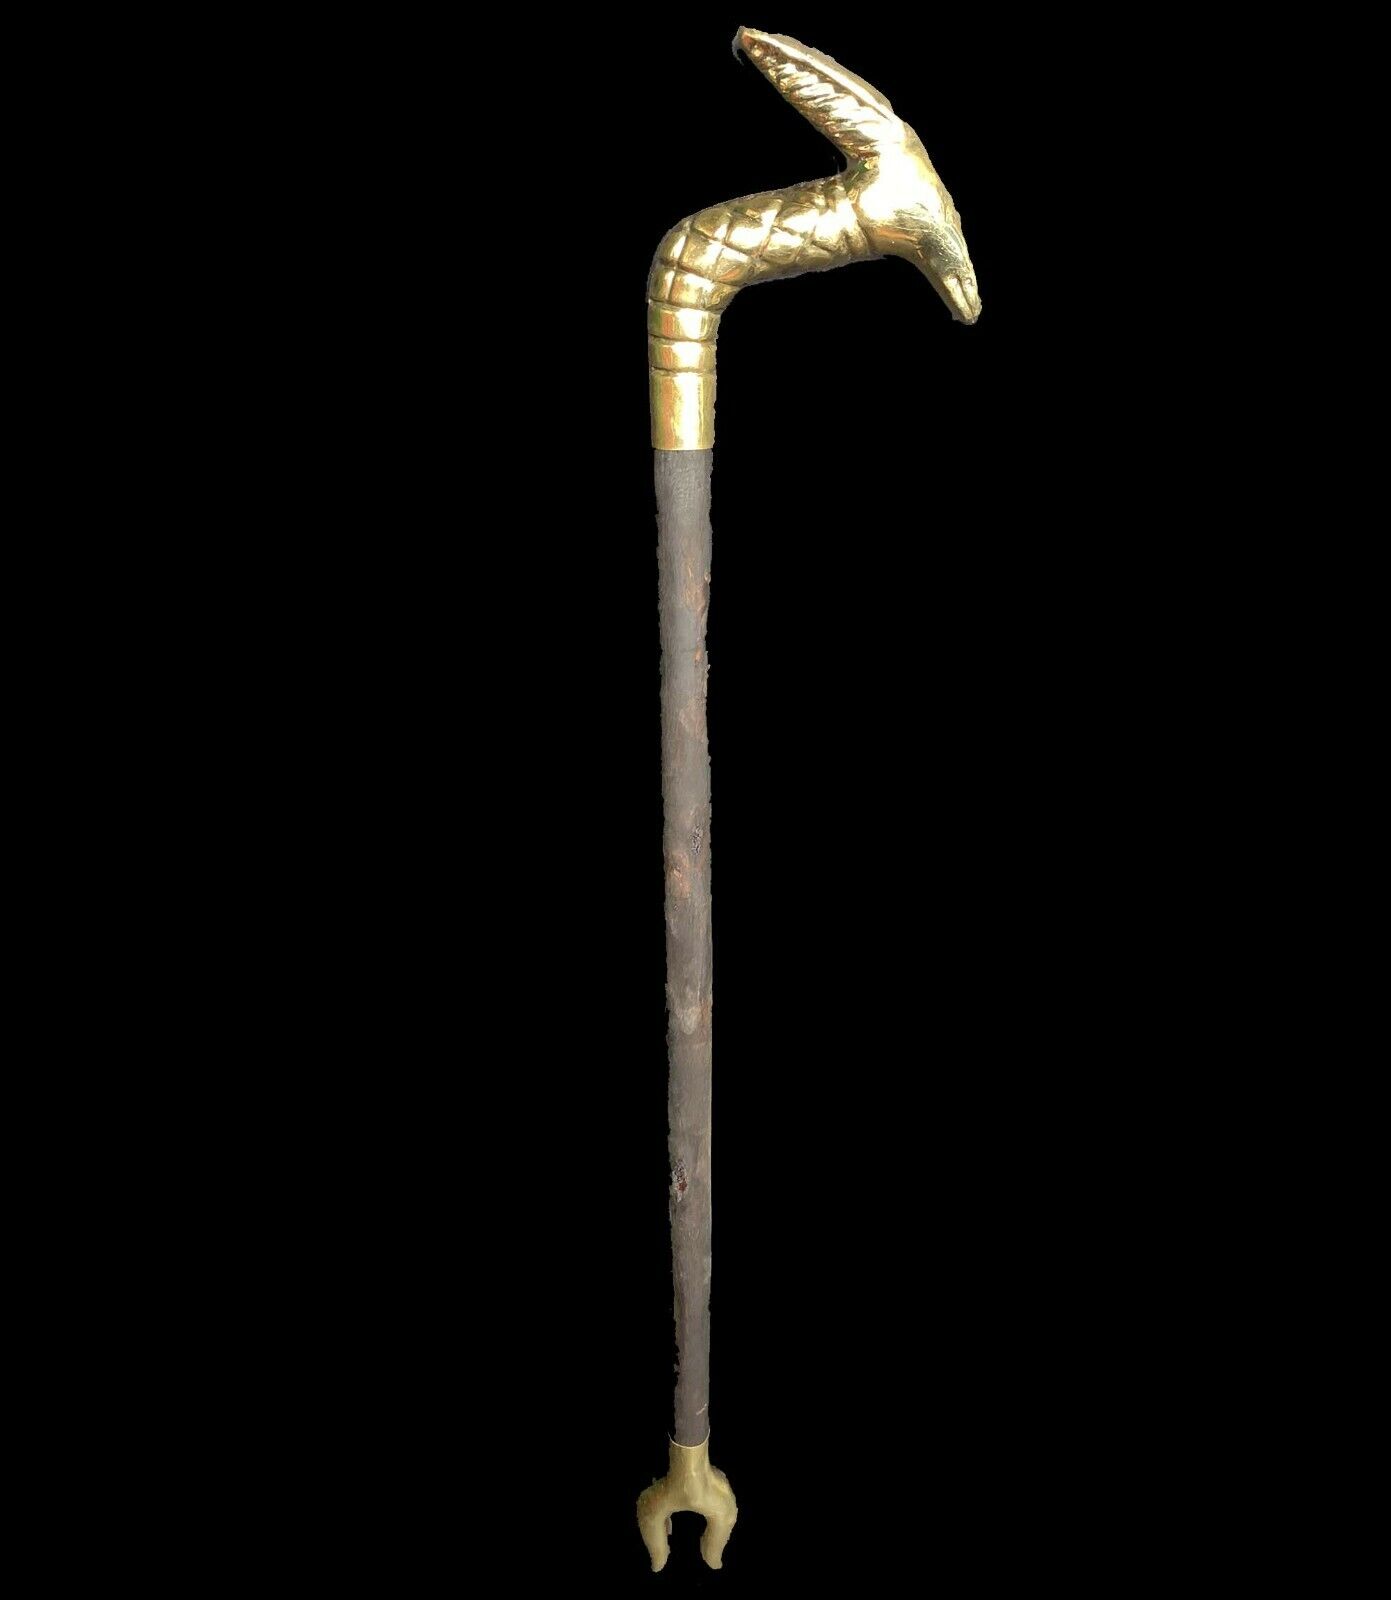 Fantastic Ancient Egyptian Was-scepter (Symbol of Royal Authority)